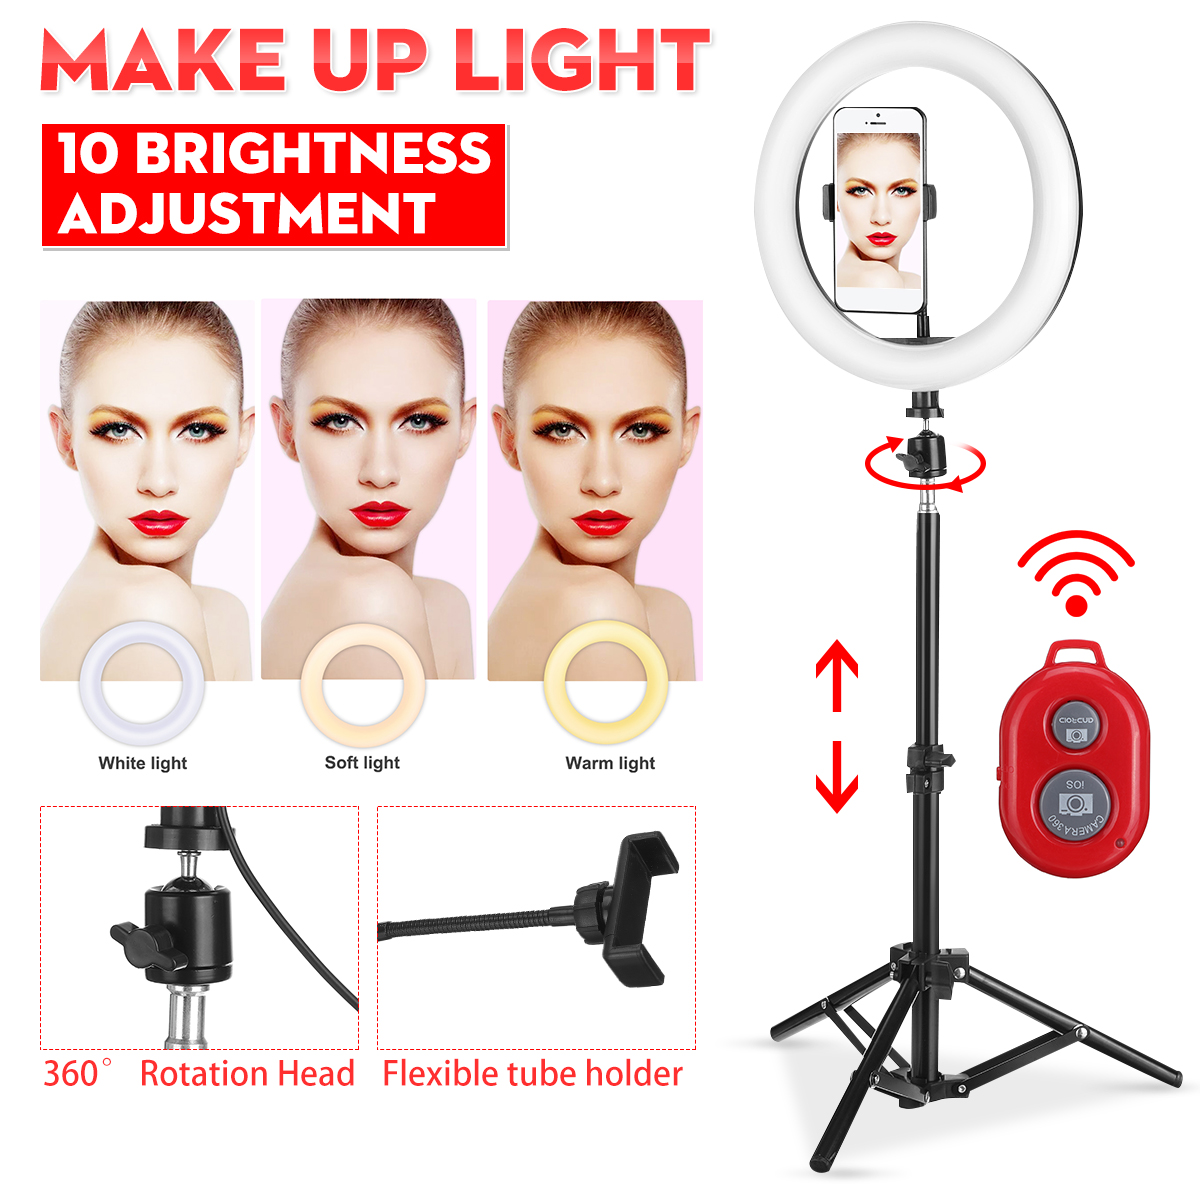 Flashes-Selfie-Lights-LED-Ring-Light-Lamp-Stand-Kit-Dimmable-Photo-Studio-Selfie-Makeup-Lamp-1760877-1